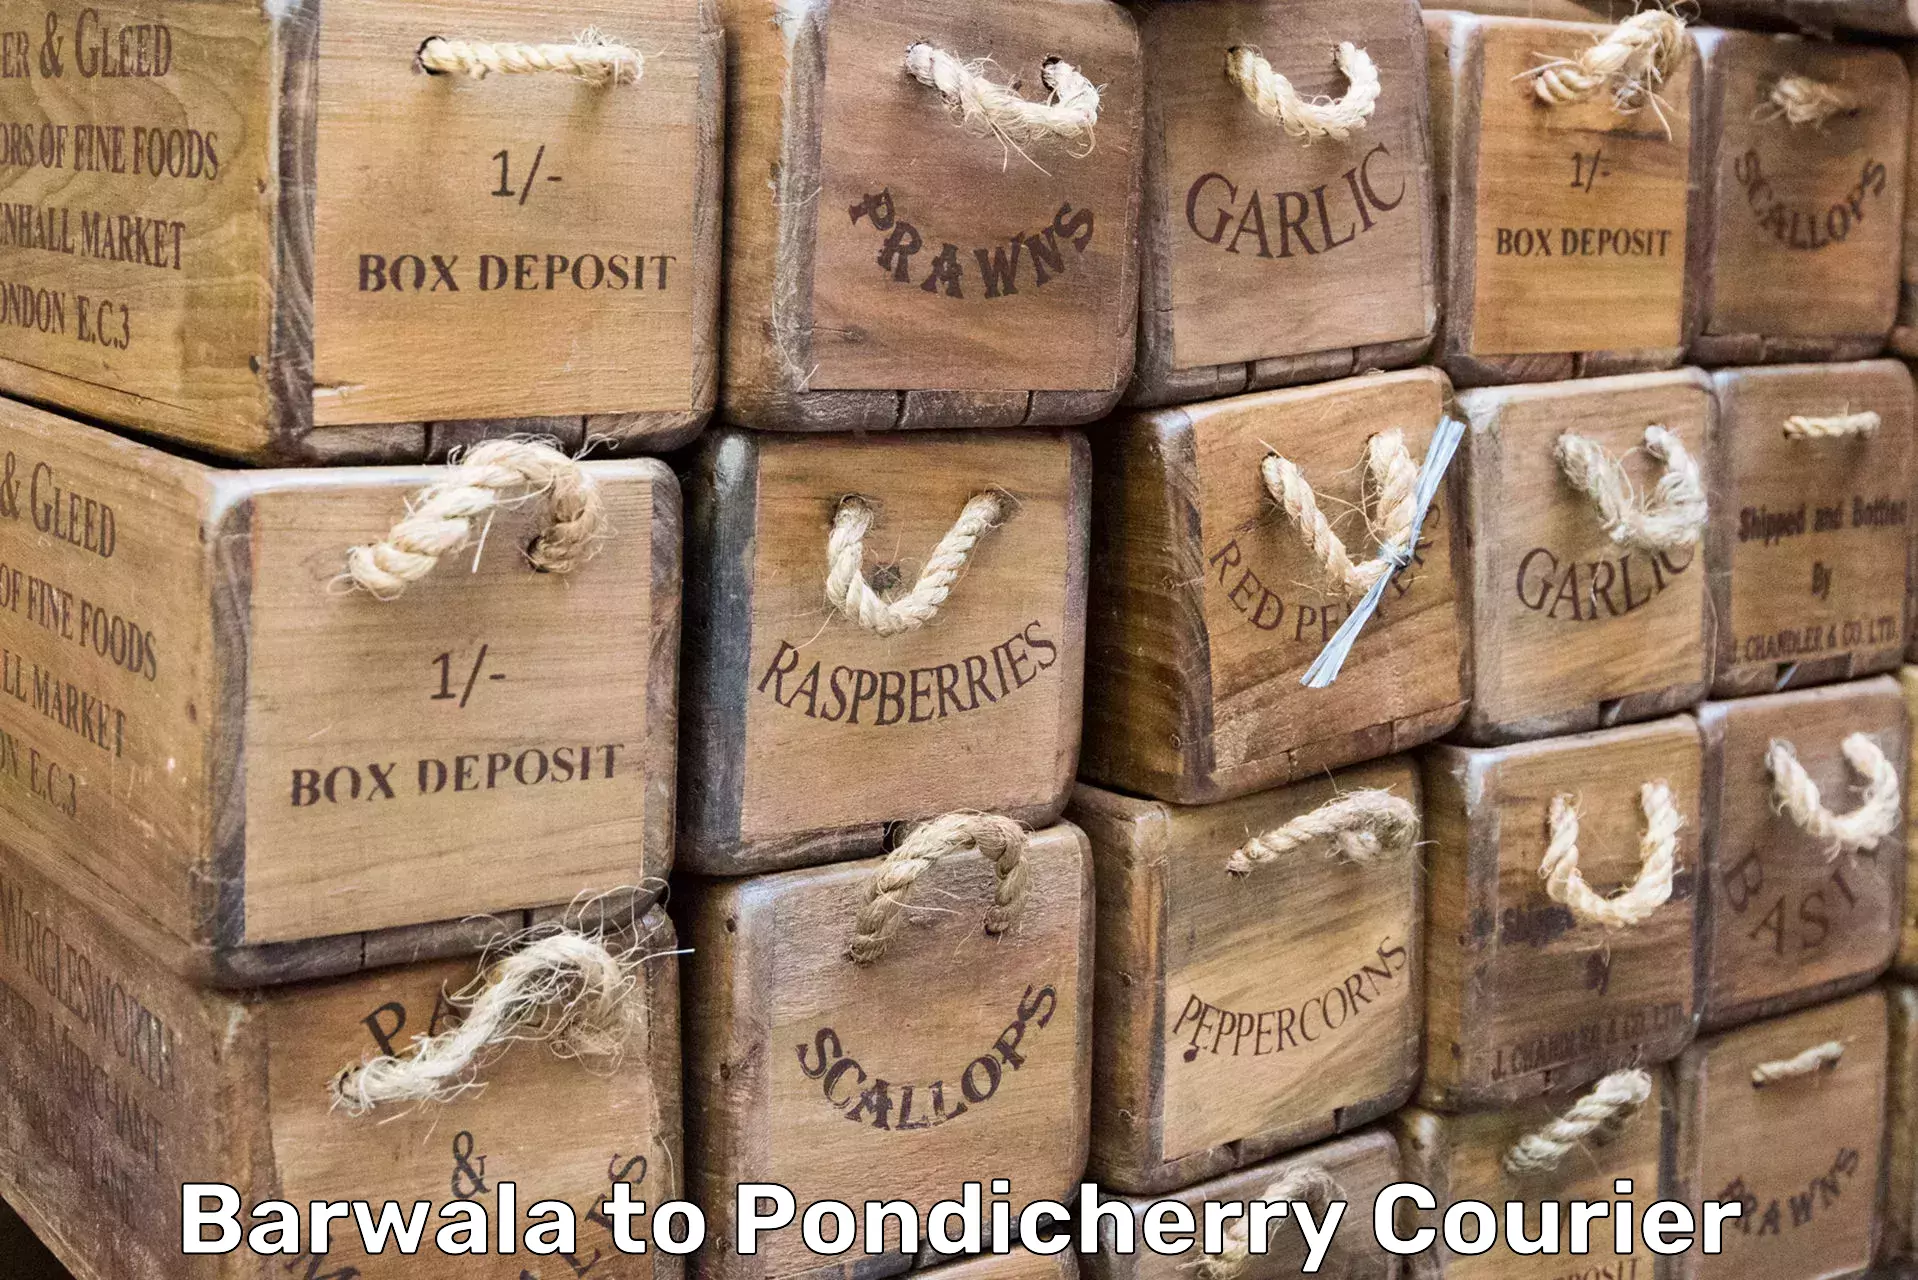 Furniture delivery service Barwala to Pondicherry